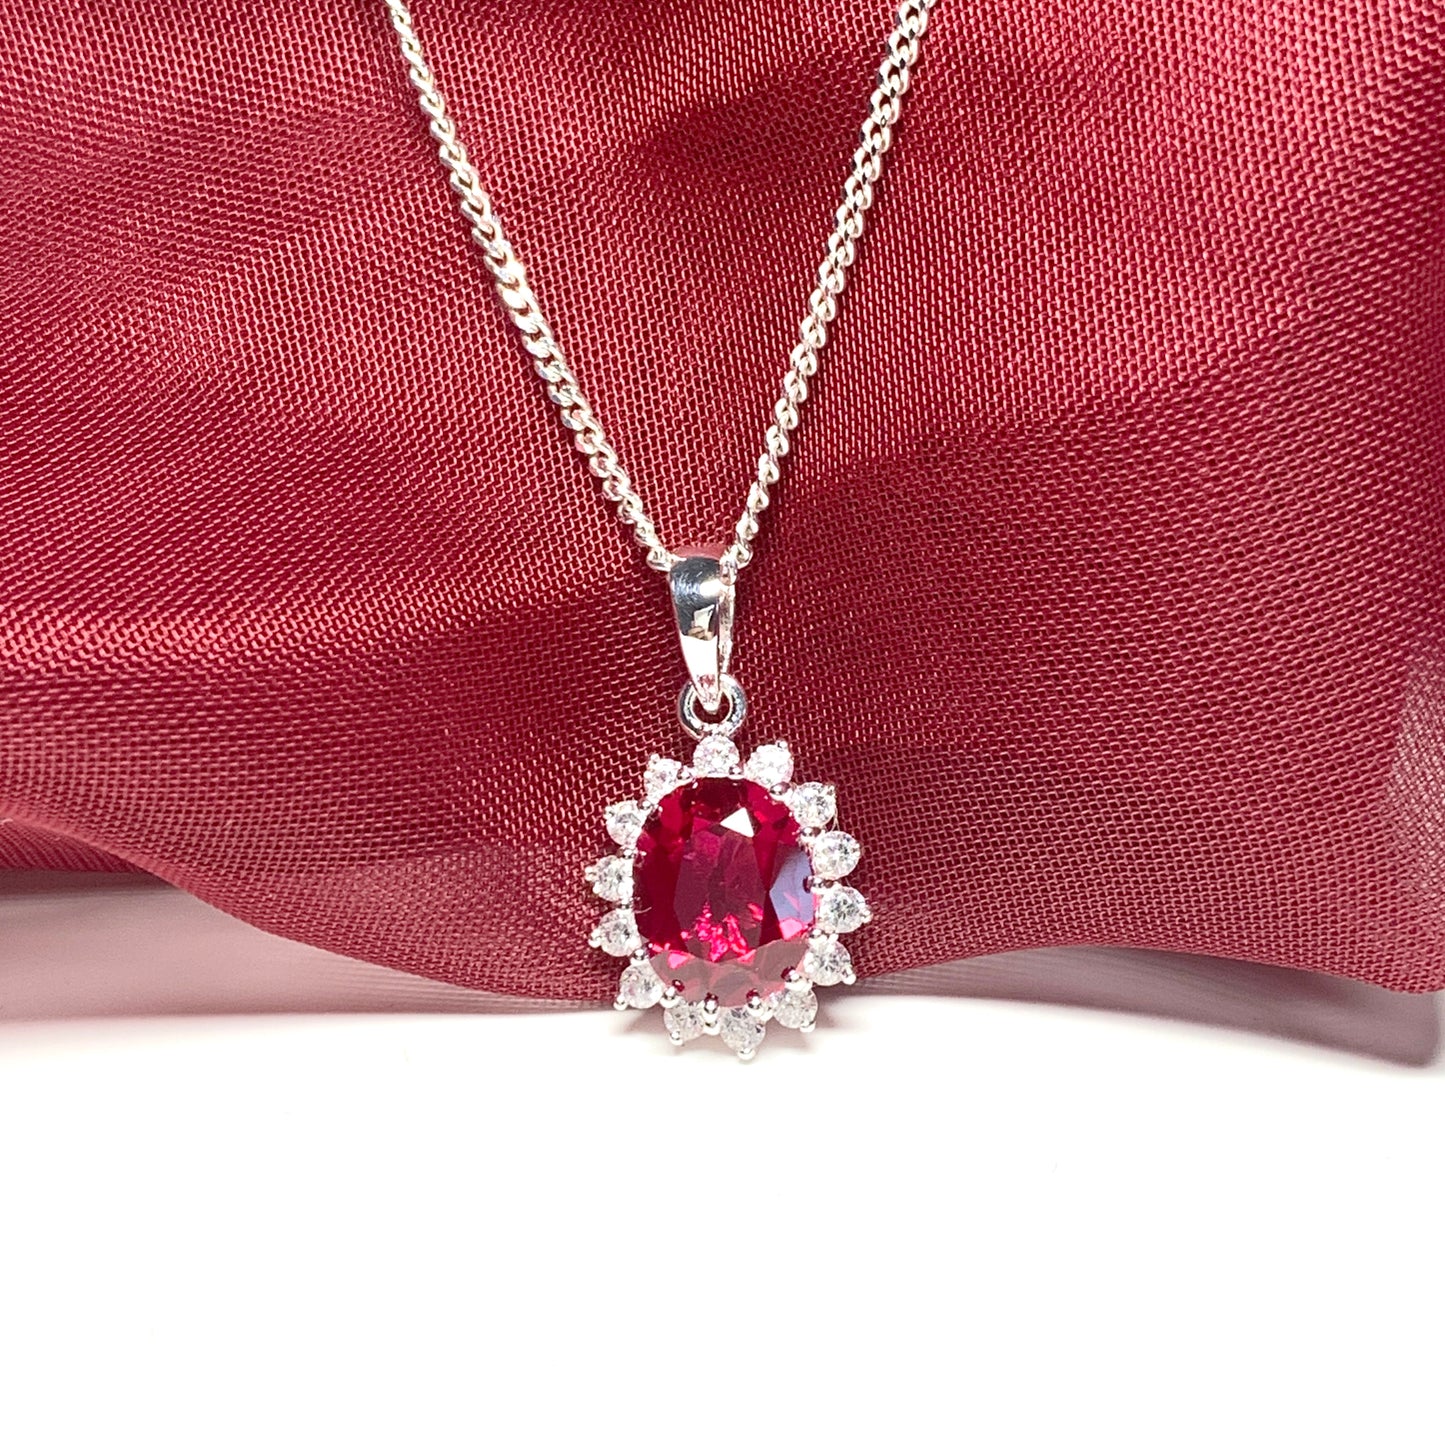 Large pendant bright ruby red and white cubic zirconia oval cluster dress cocktail necklace